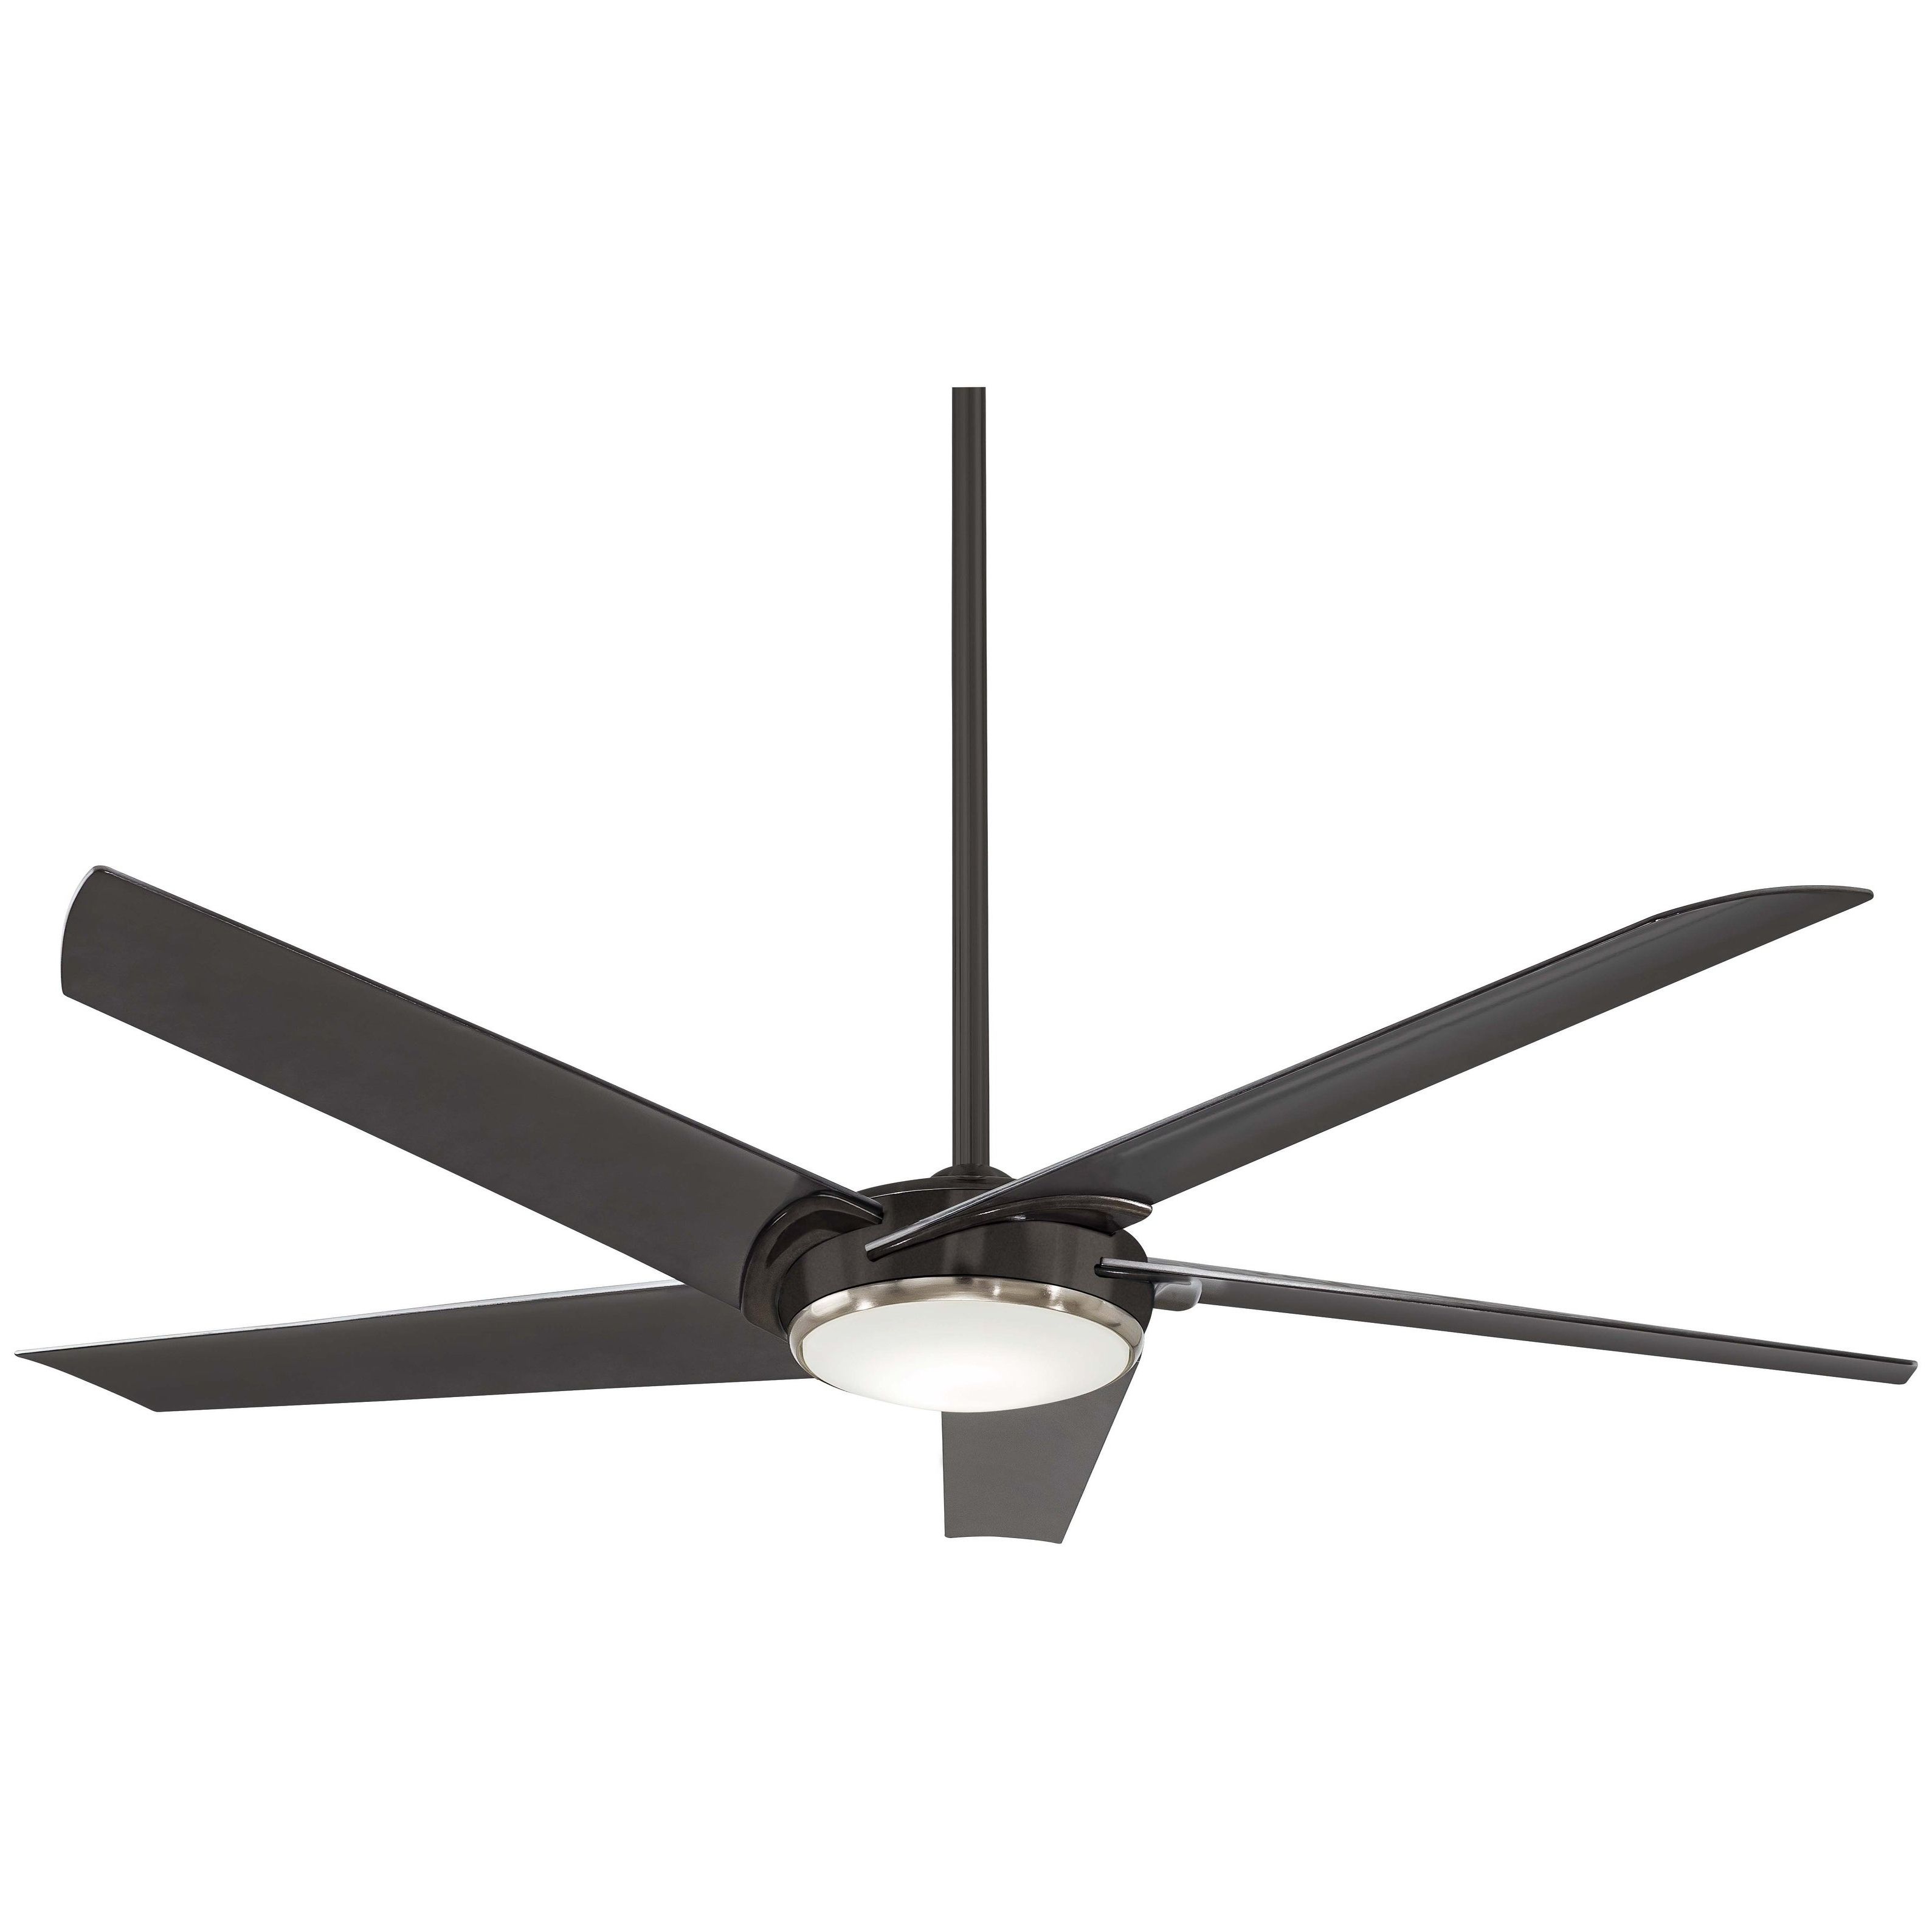 Raptor 60 Inch Ceiling Fan With Led In Gun Metal Finish W/gun Metal Blades Pertaining To Current Raptor 5 Blade Ceiling Fans (Photo 3 of 20)